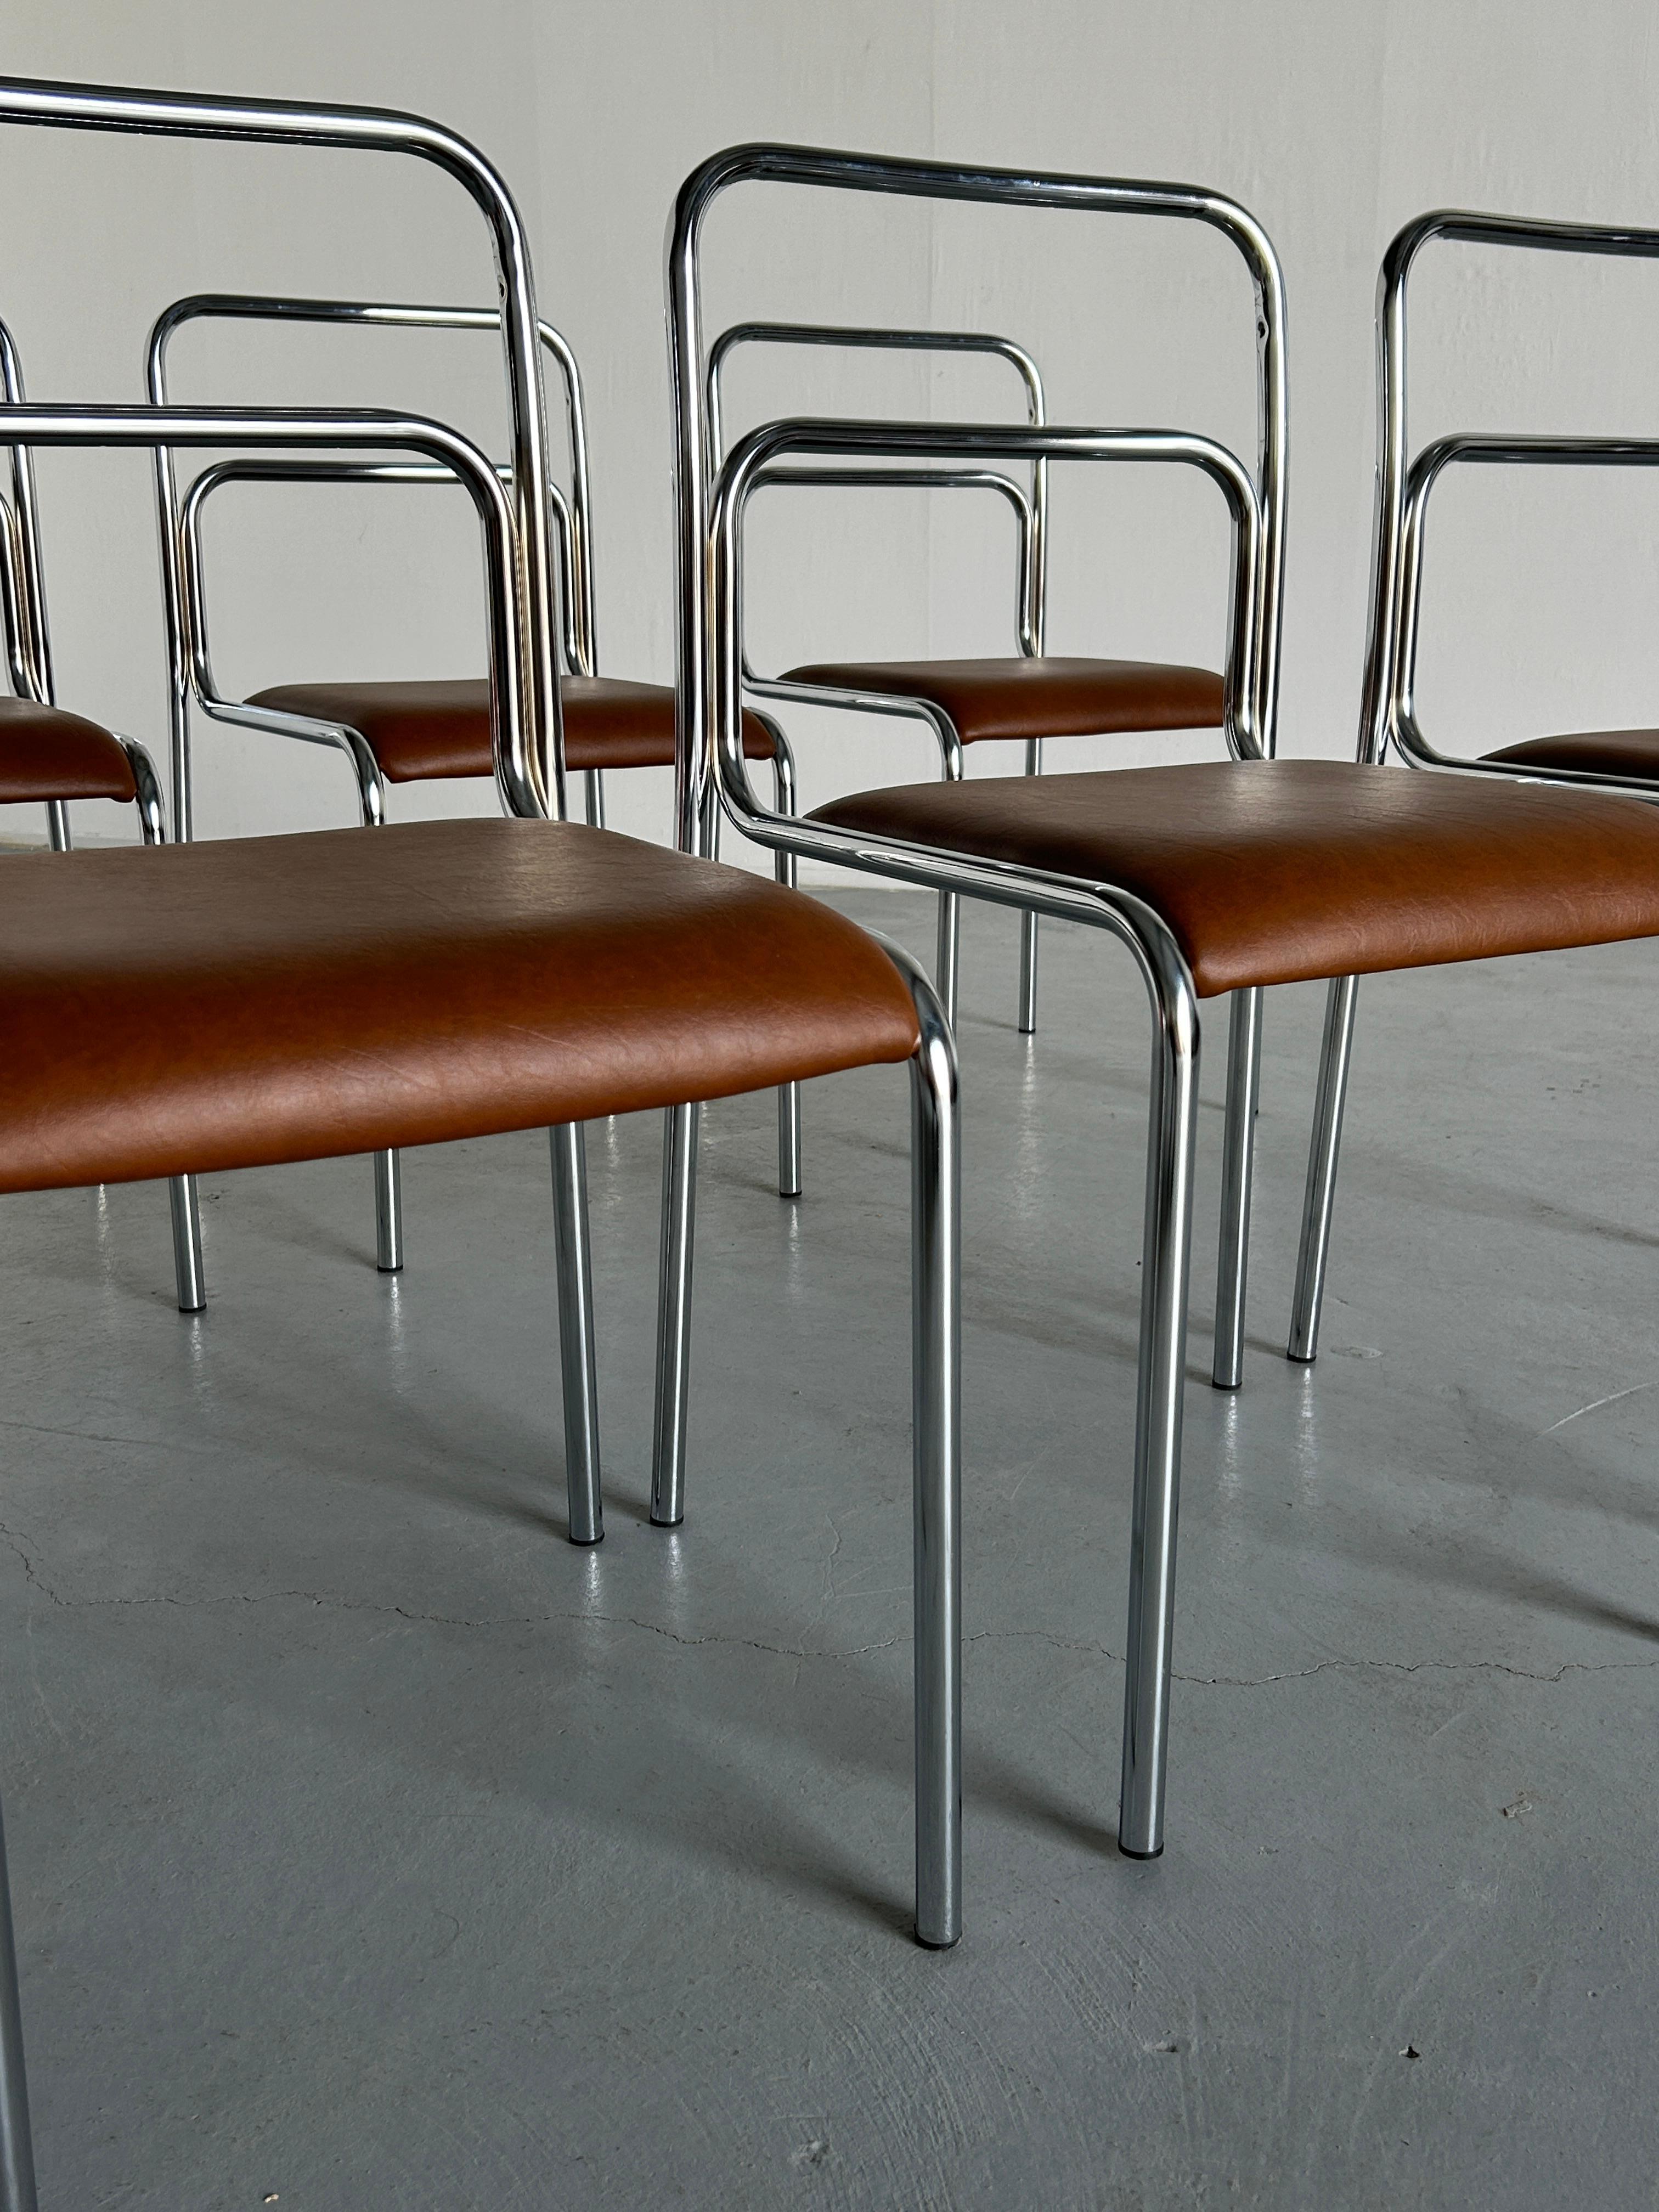 Bauhaus Design Chrome Tubular Steel and Brown Faux Leather Dining Chairs, 1980s For Sale 3